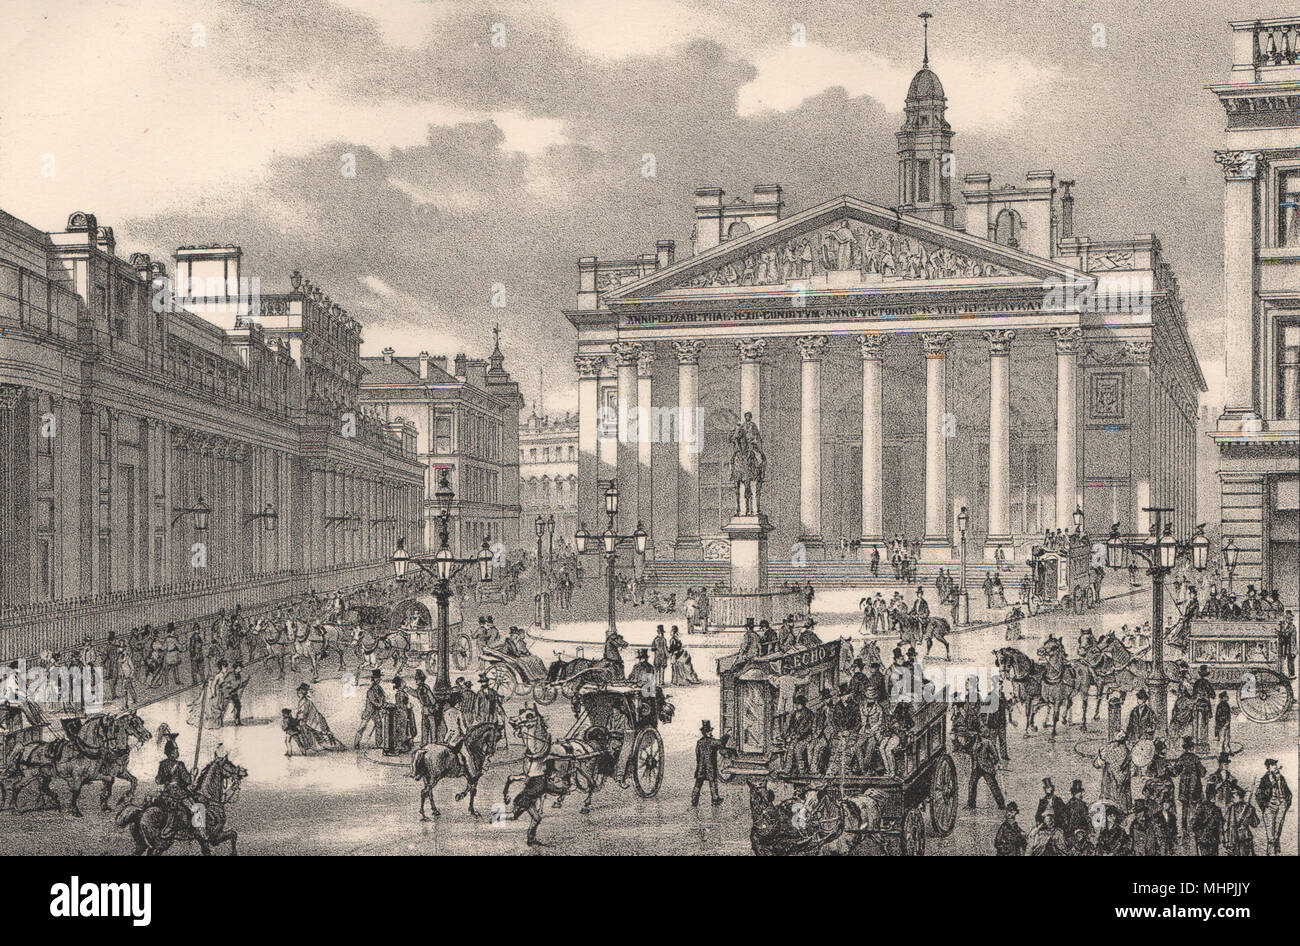 The Royal Exchange & Bank of England, from the Mansion House, London c1880 Stock Photo